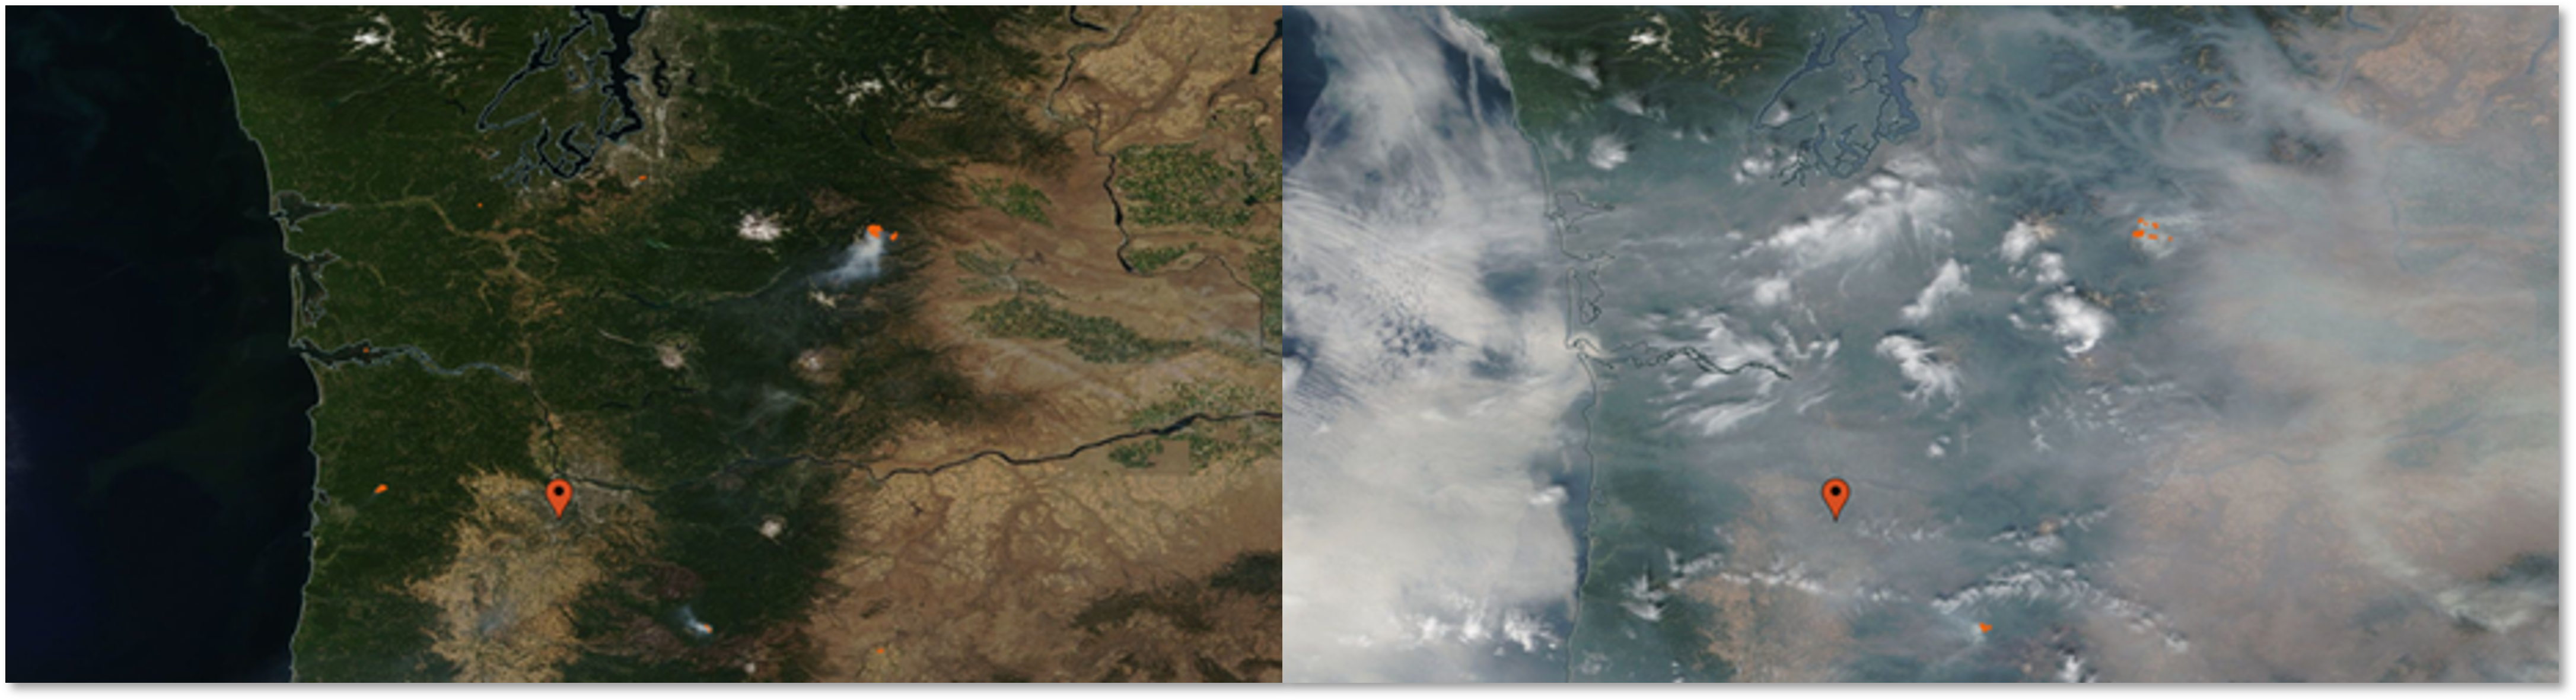 Figure 6: Wildfire plumes in OR and WA on August 9th (left) and 13th (right).